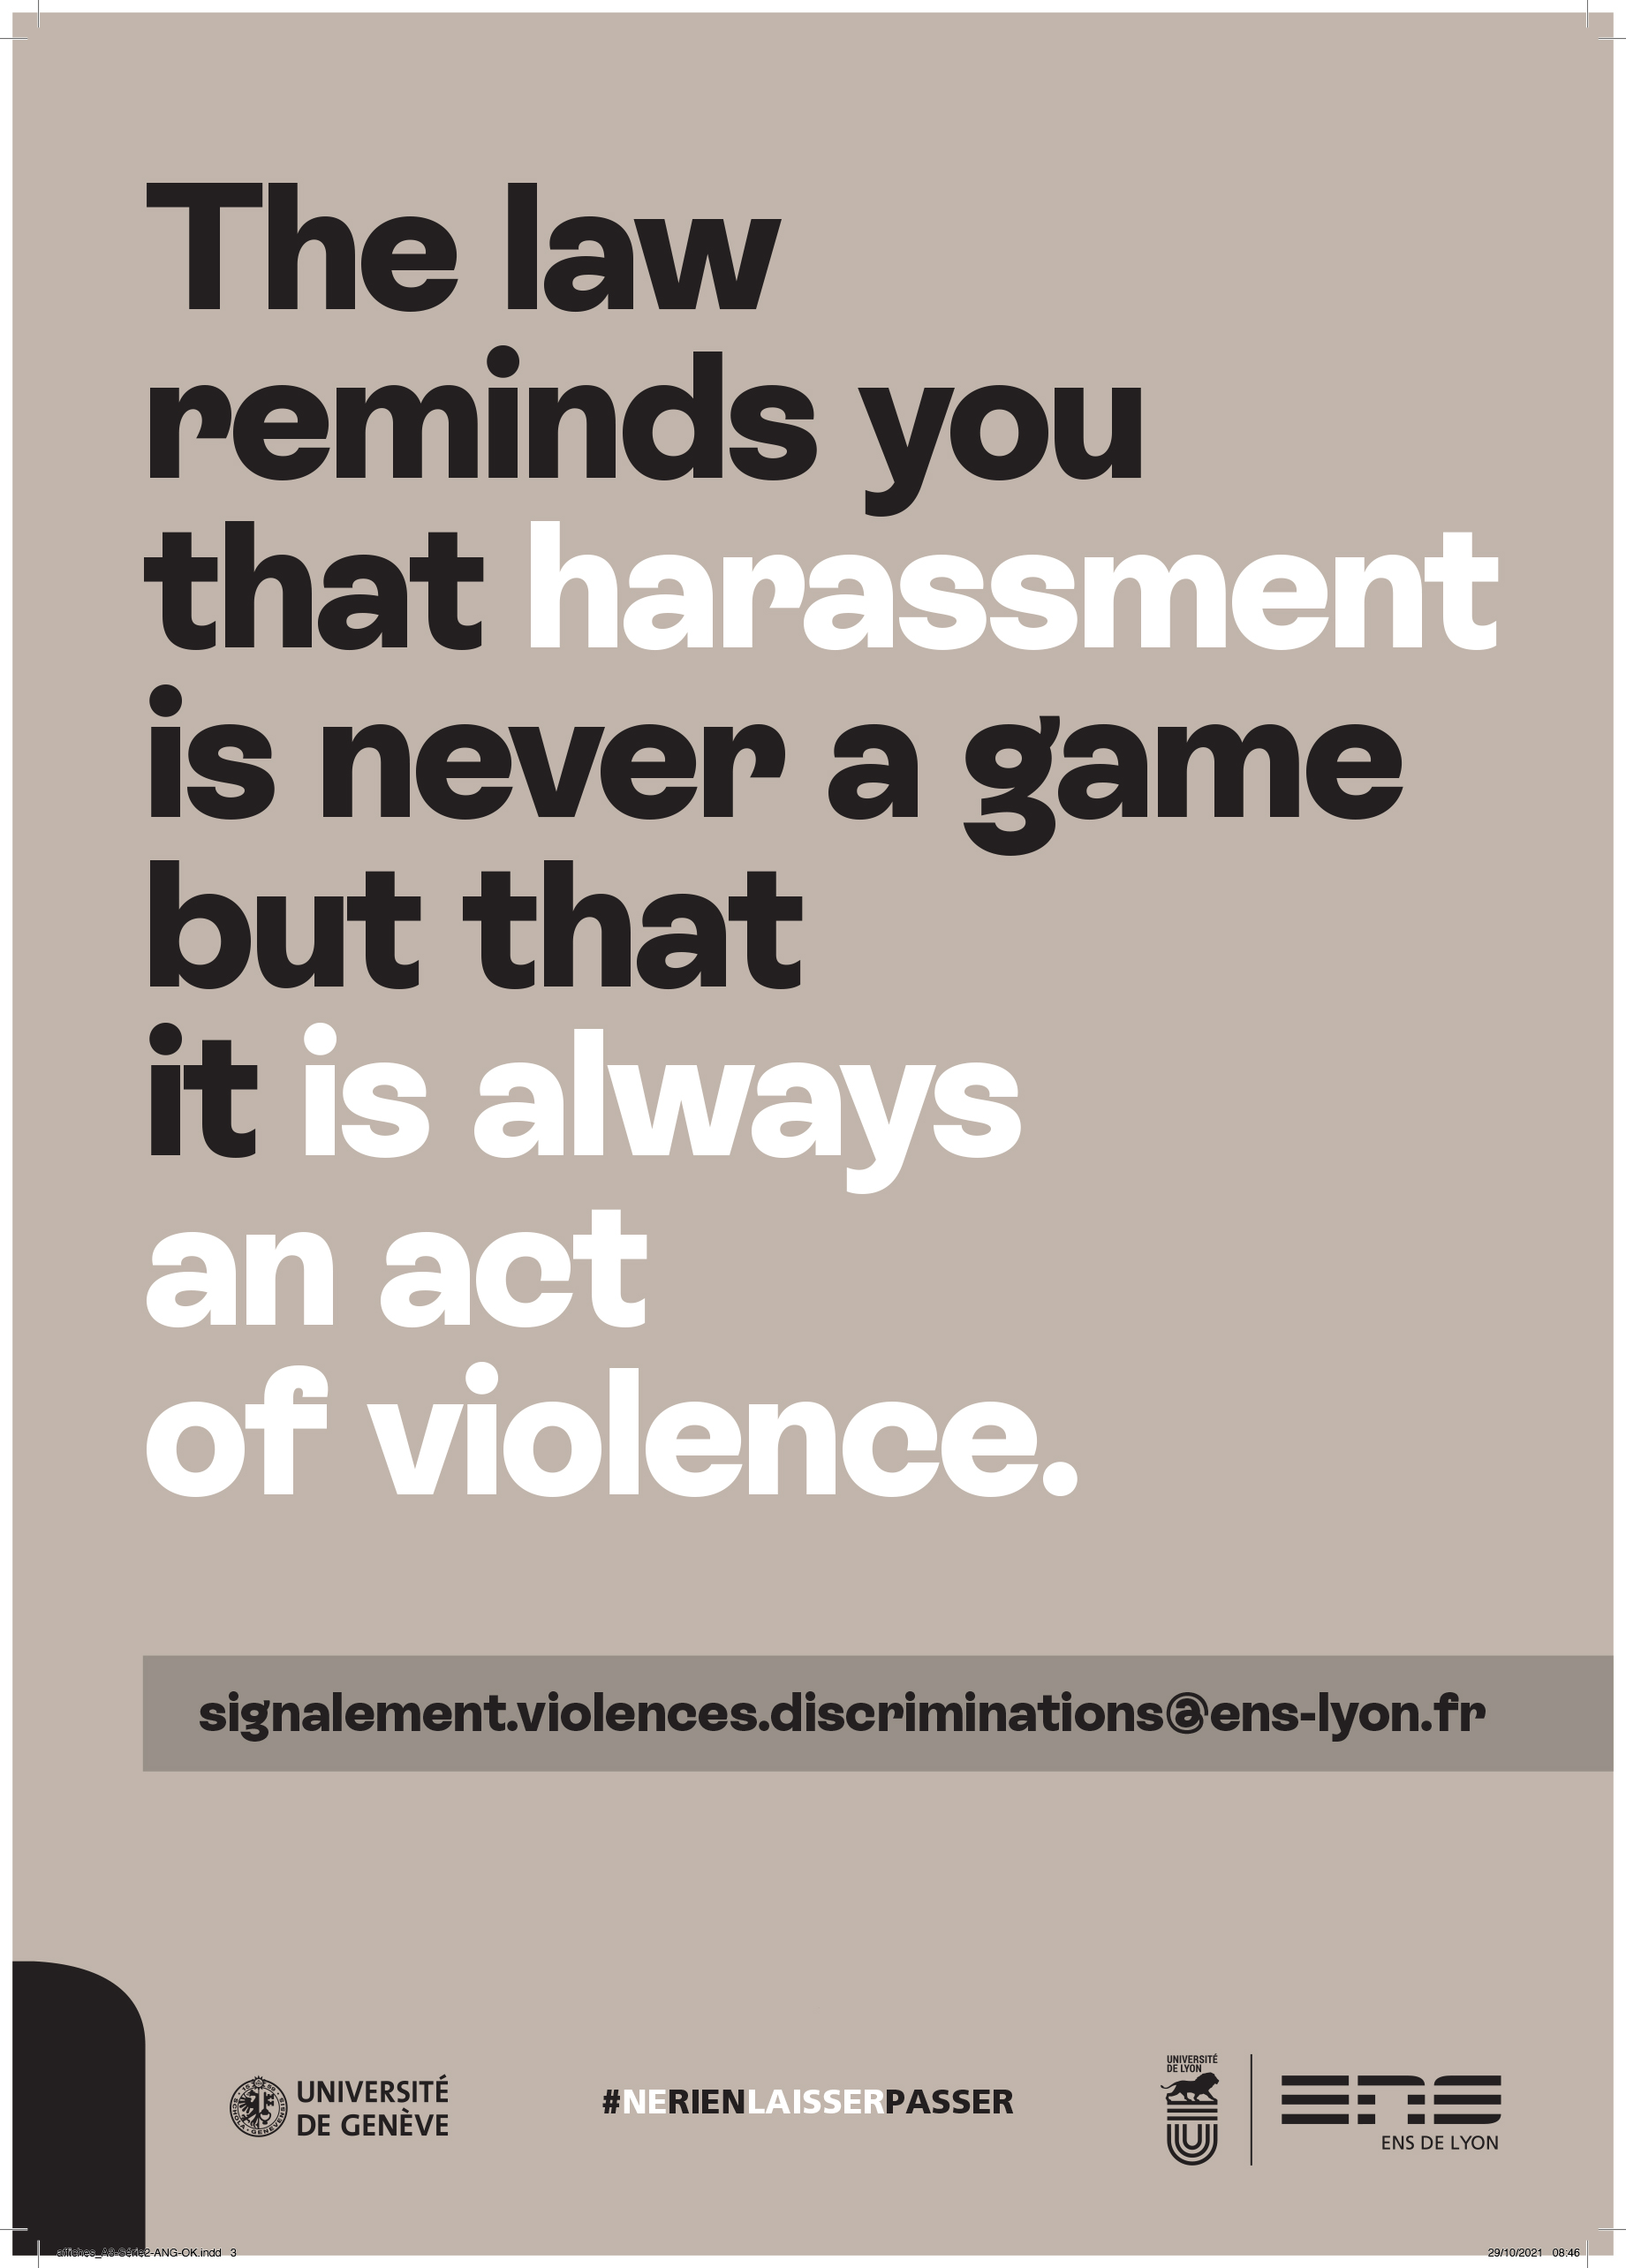 The law reminds you that harassment is never a game but that it is always an act of violence